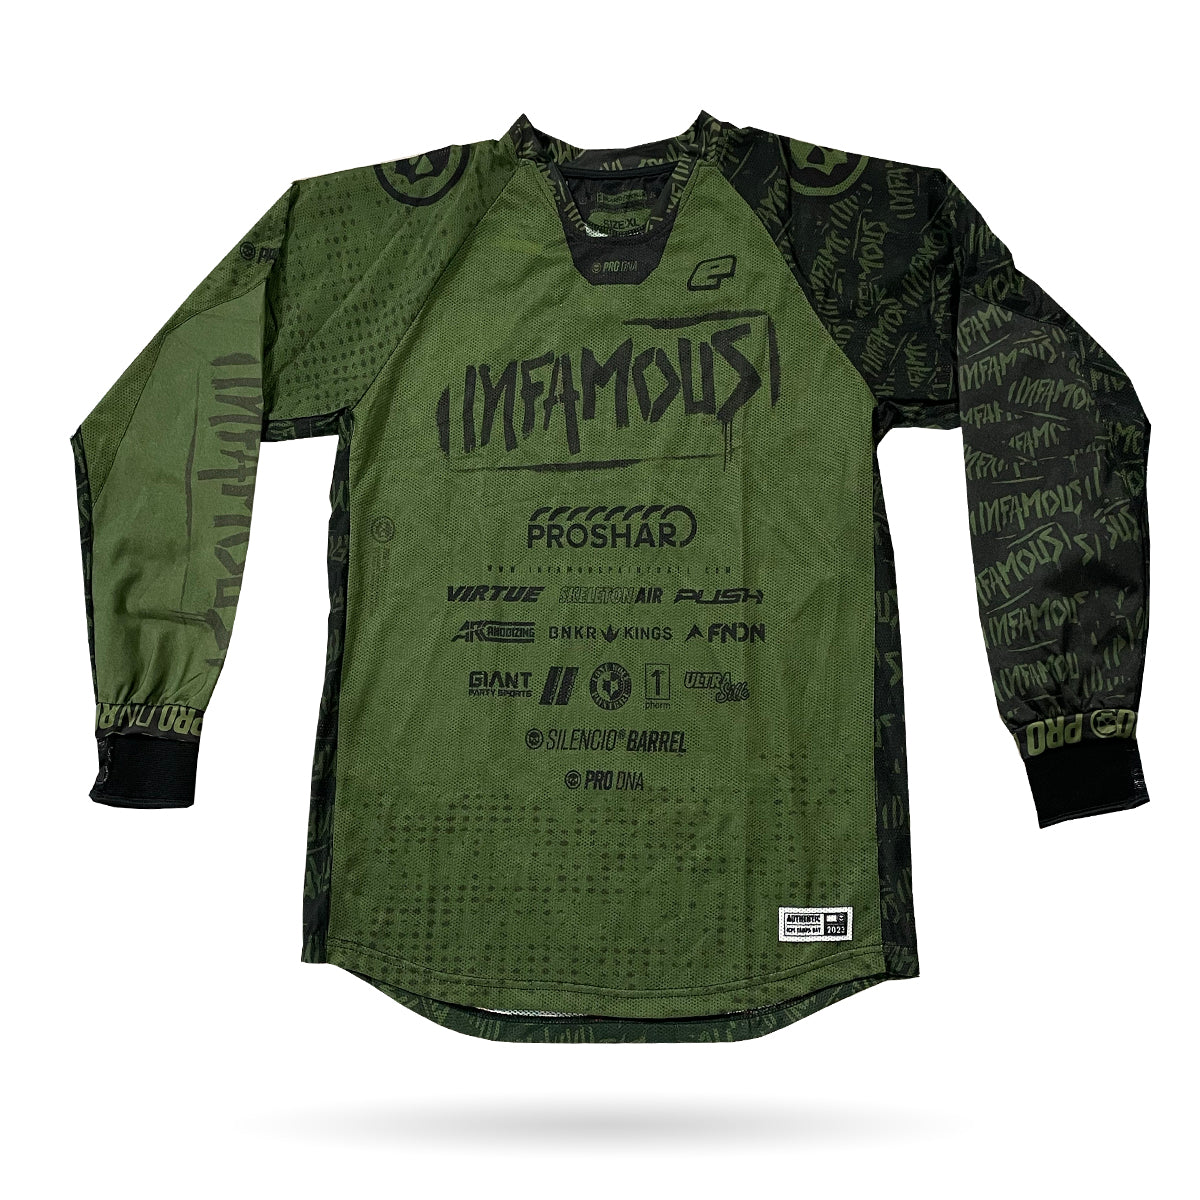 Infamous Jersey - Olive Tampa